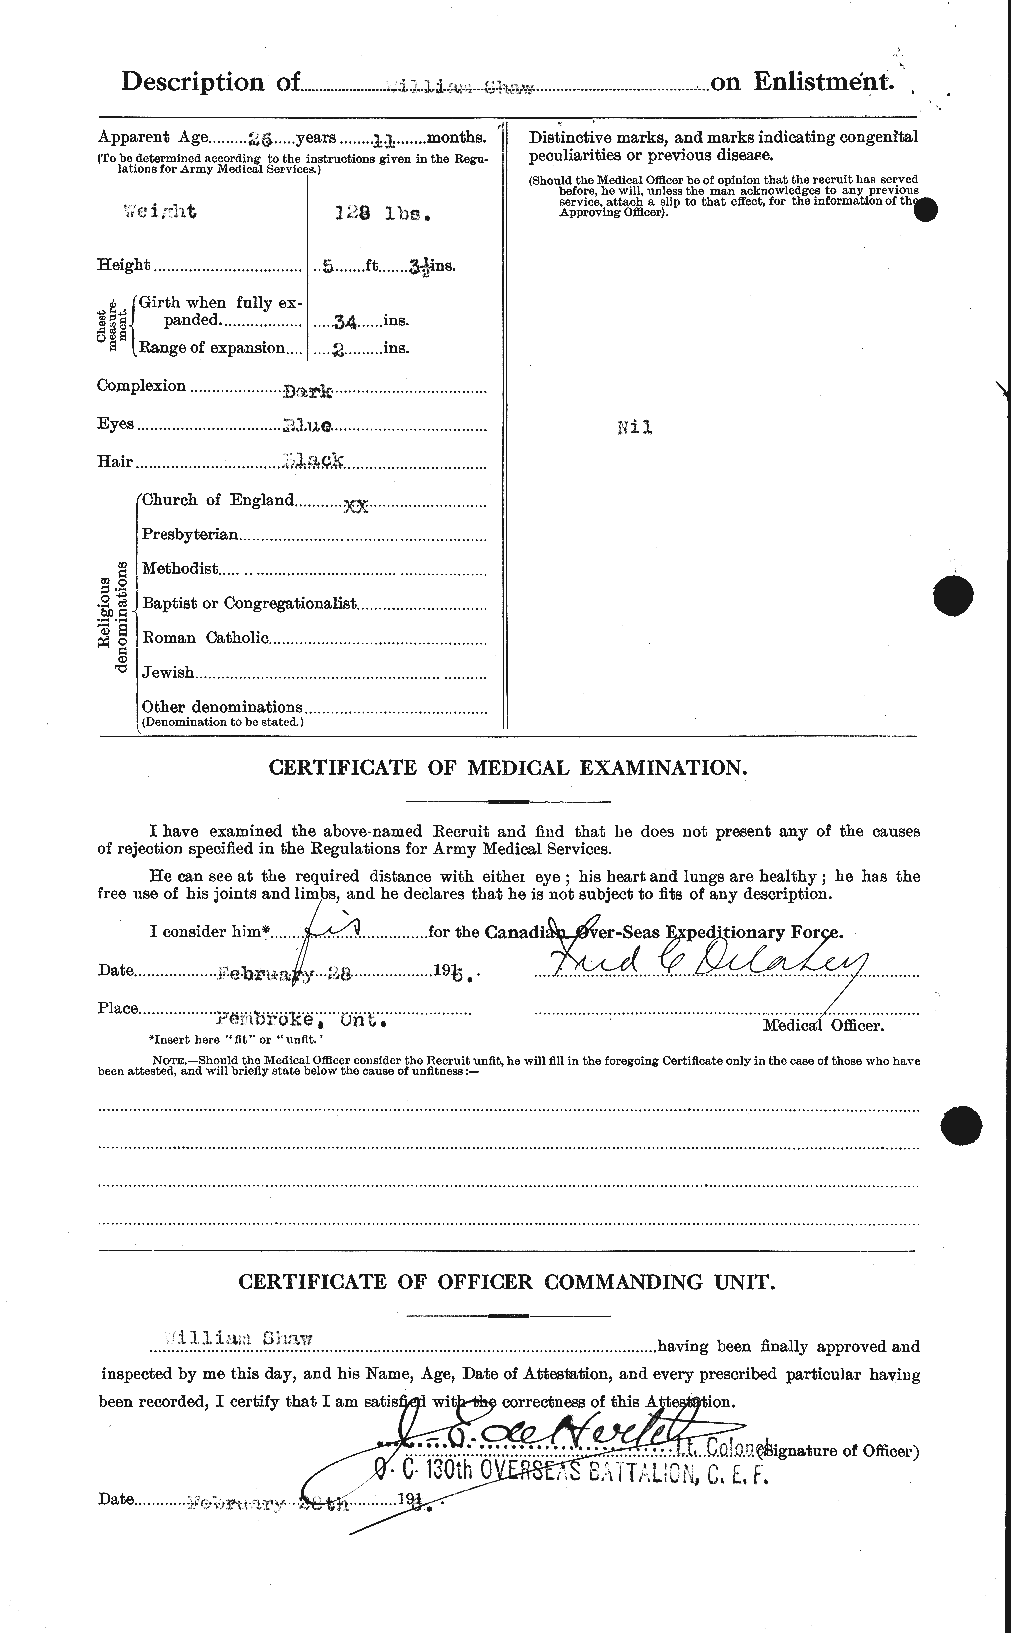 Personnel Records of the First World War - CEF 089441b